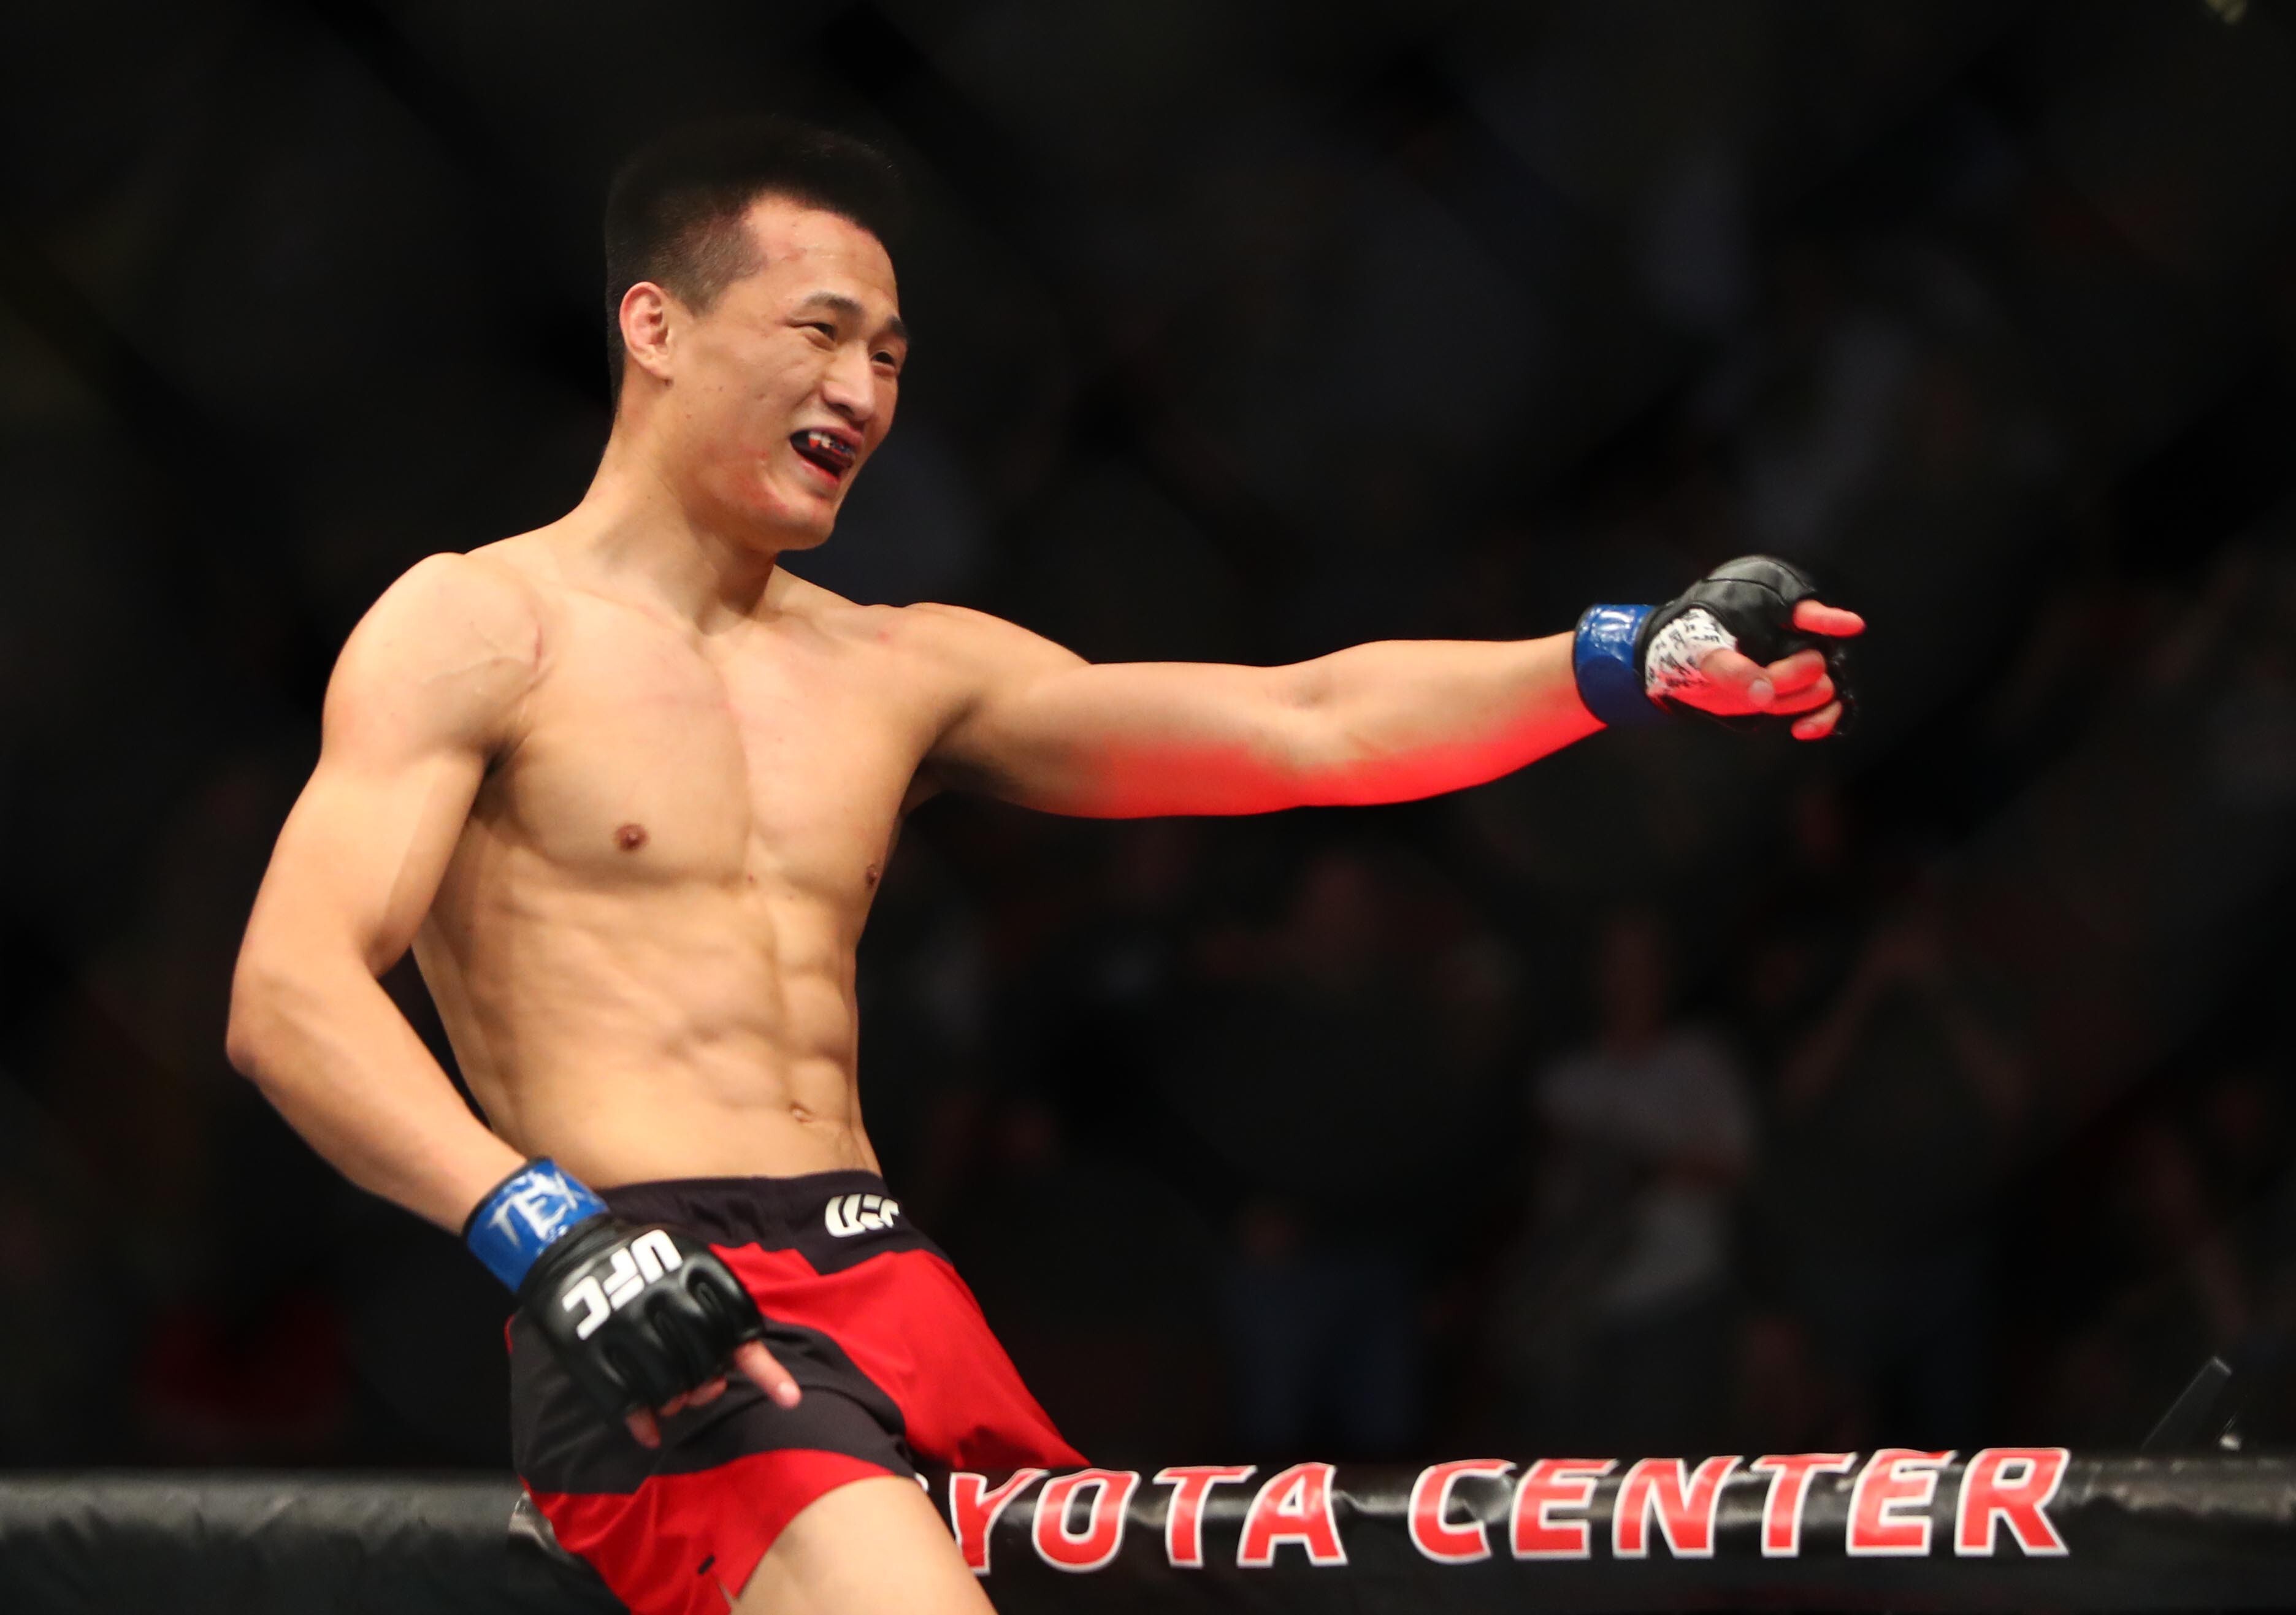 Chan Sung Jung, the ‘Korean Zombie’, has called out Alexander Volkanovski after he beat Max Holloway at UFC 251. Photo: USA Today